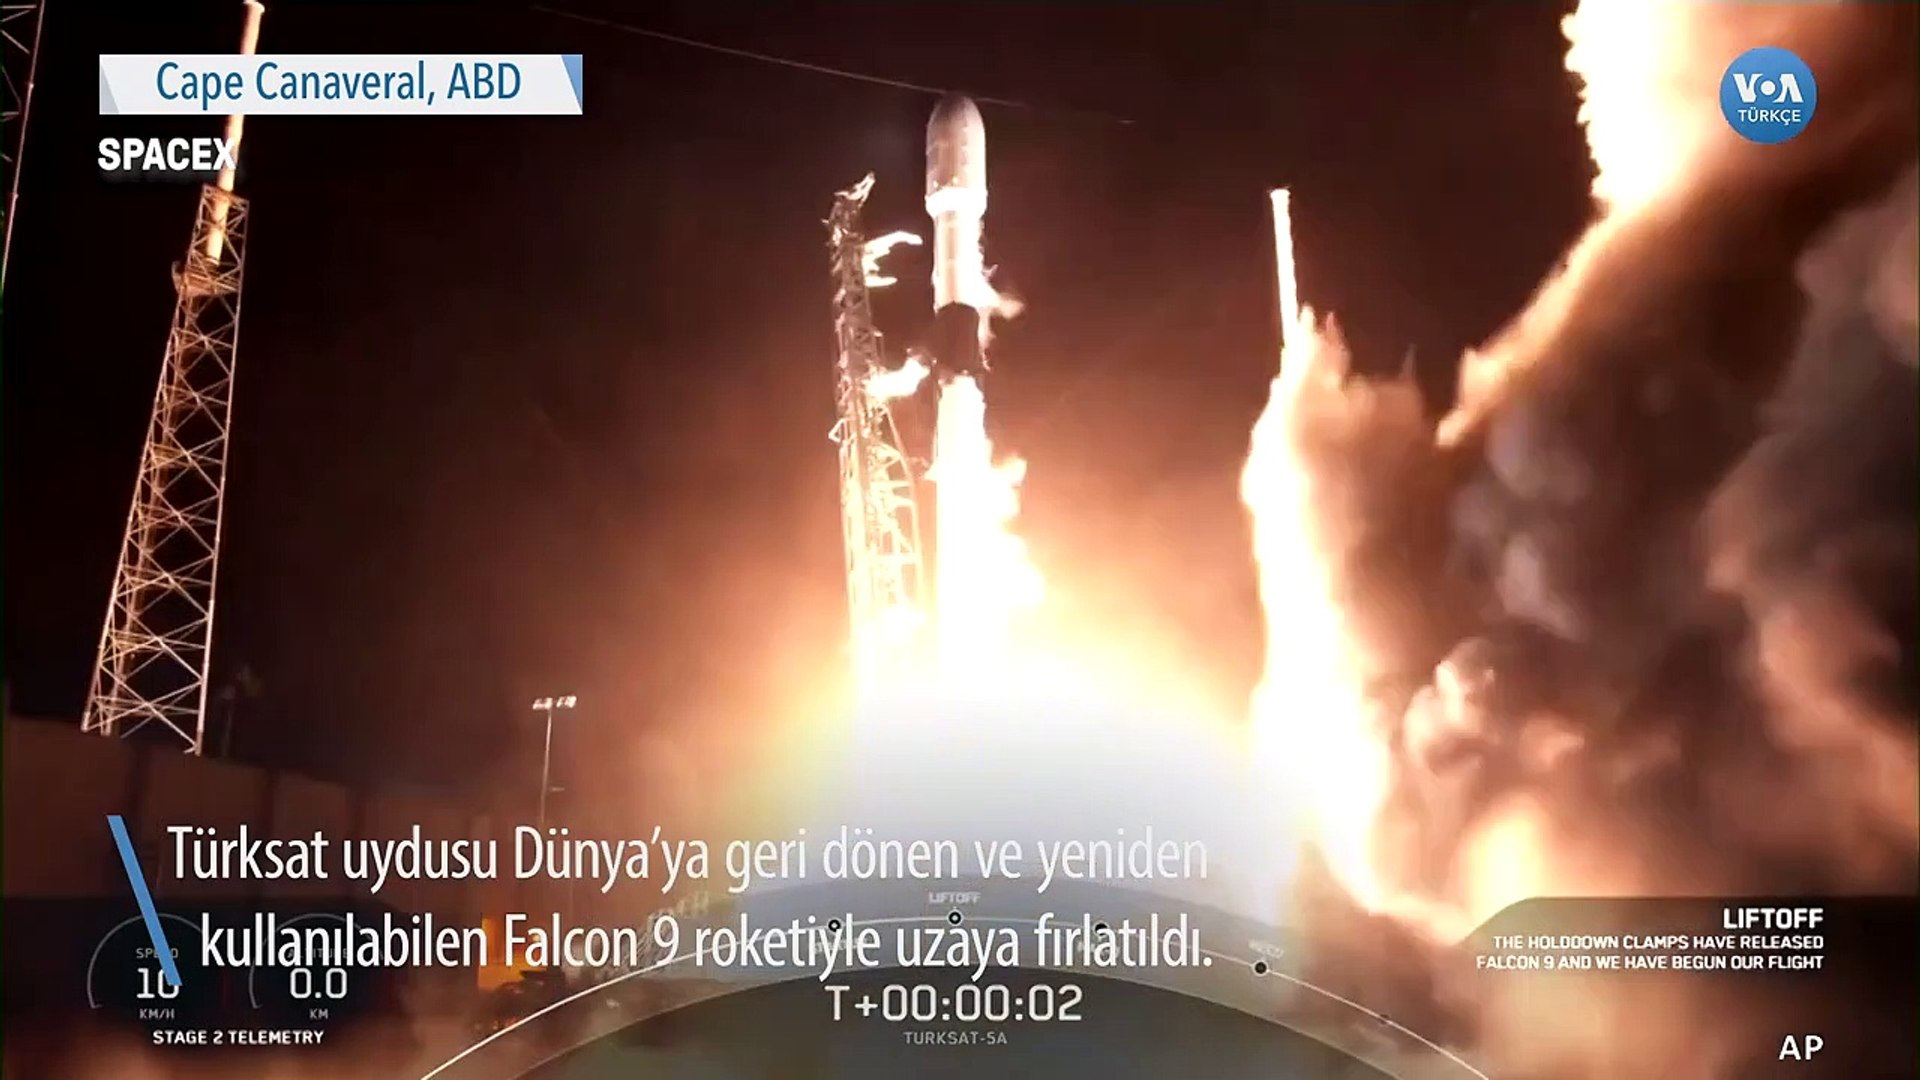 SpaceX has successfully launched a new Falcon 9 rocket, Türksat Uydusunu, from Vandenberg Air Force 